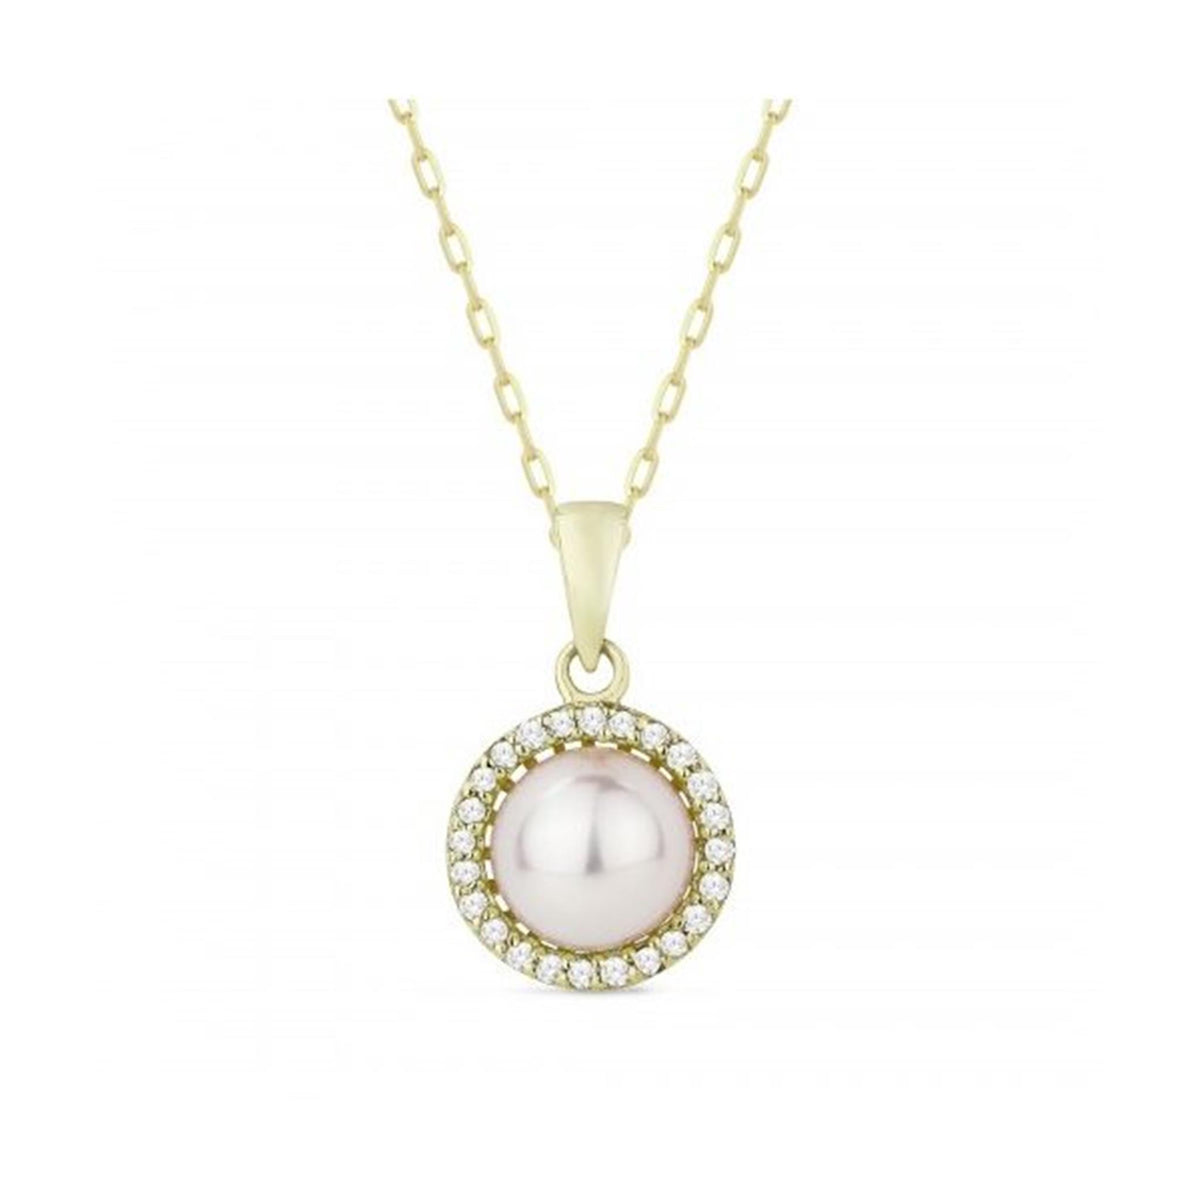 14Kt Yellow Gold Halo Pendant With mm Fresh Water Cultured Pearl